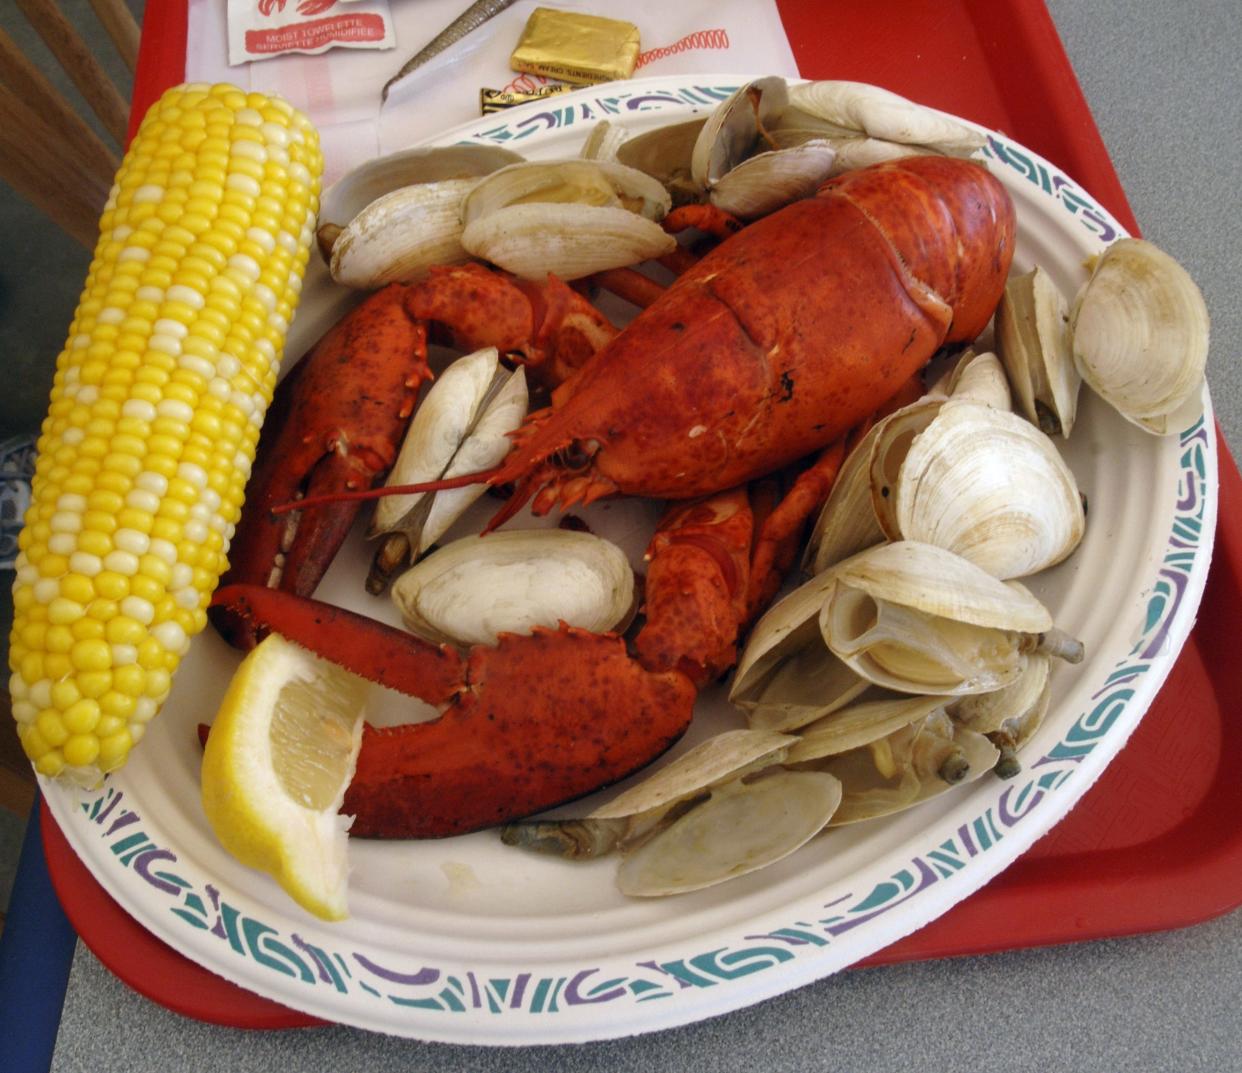 Although this Arnold's clambake photo was taken in 2005, things haven't changed much. These days, the dish comes with clam chowder and you can order steamers on the side for an extra charge.